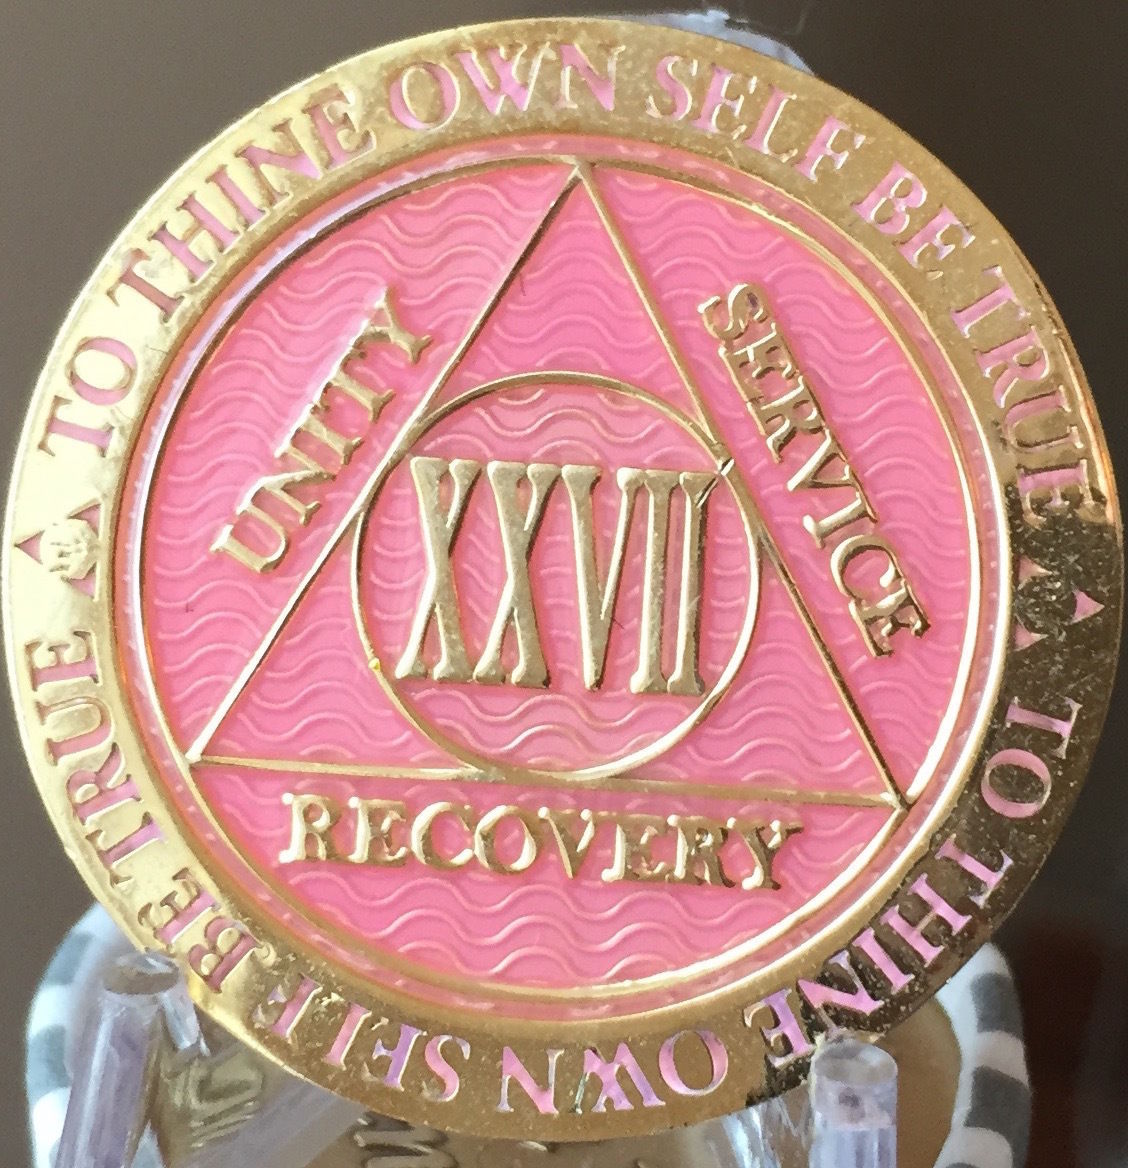 7 Year AA Medallion Pink Gold Plated Alcoholics Anonymous Sobriety Chip Coin VII 